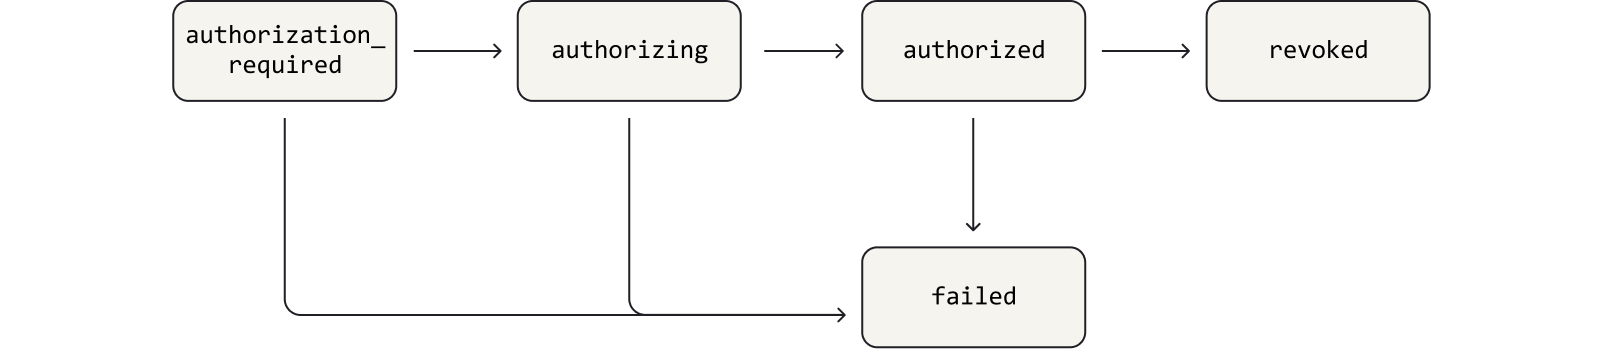 The flow of a mandate through statuses. A mandate transitions from `authorized` to `failed` when the mandate expires, based on the date specified in the mandate constraints.